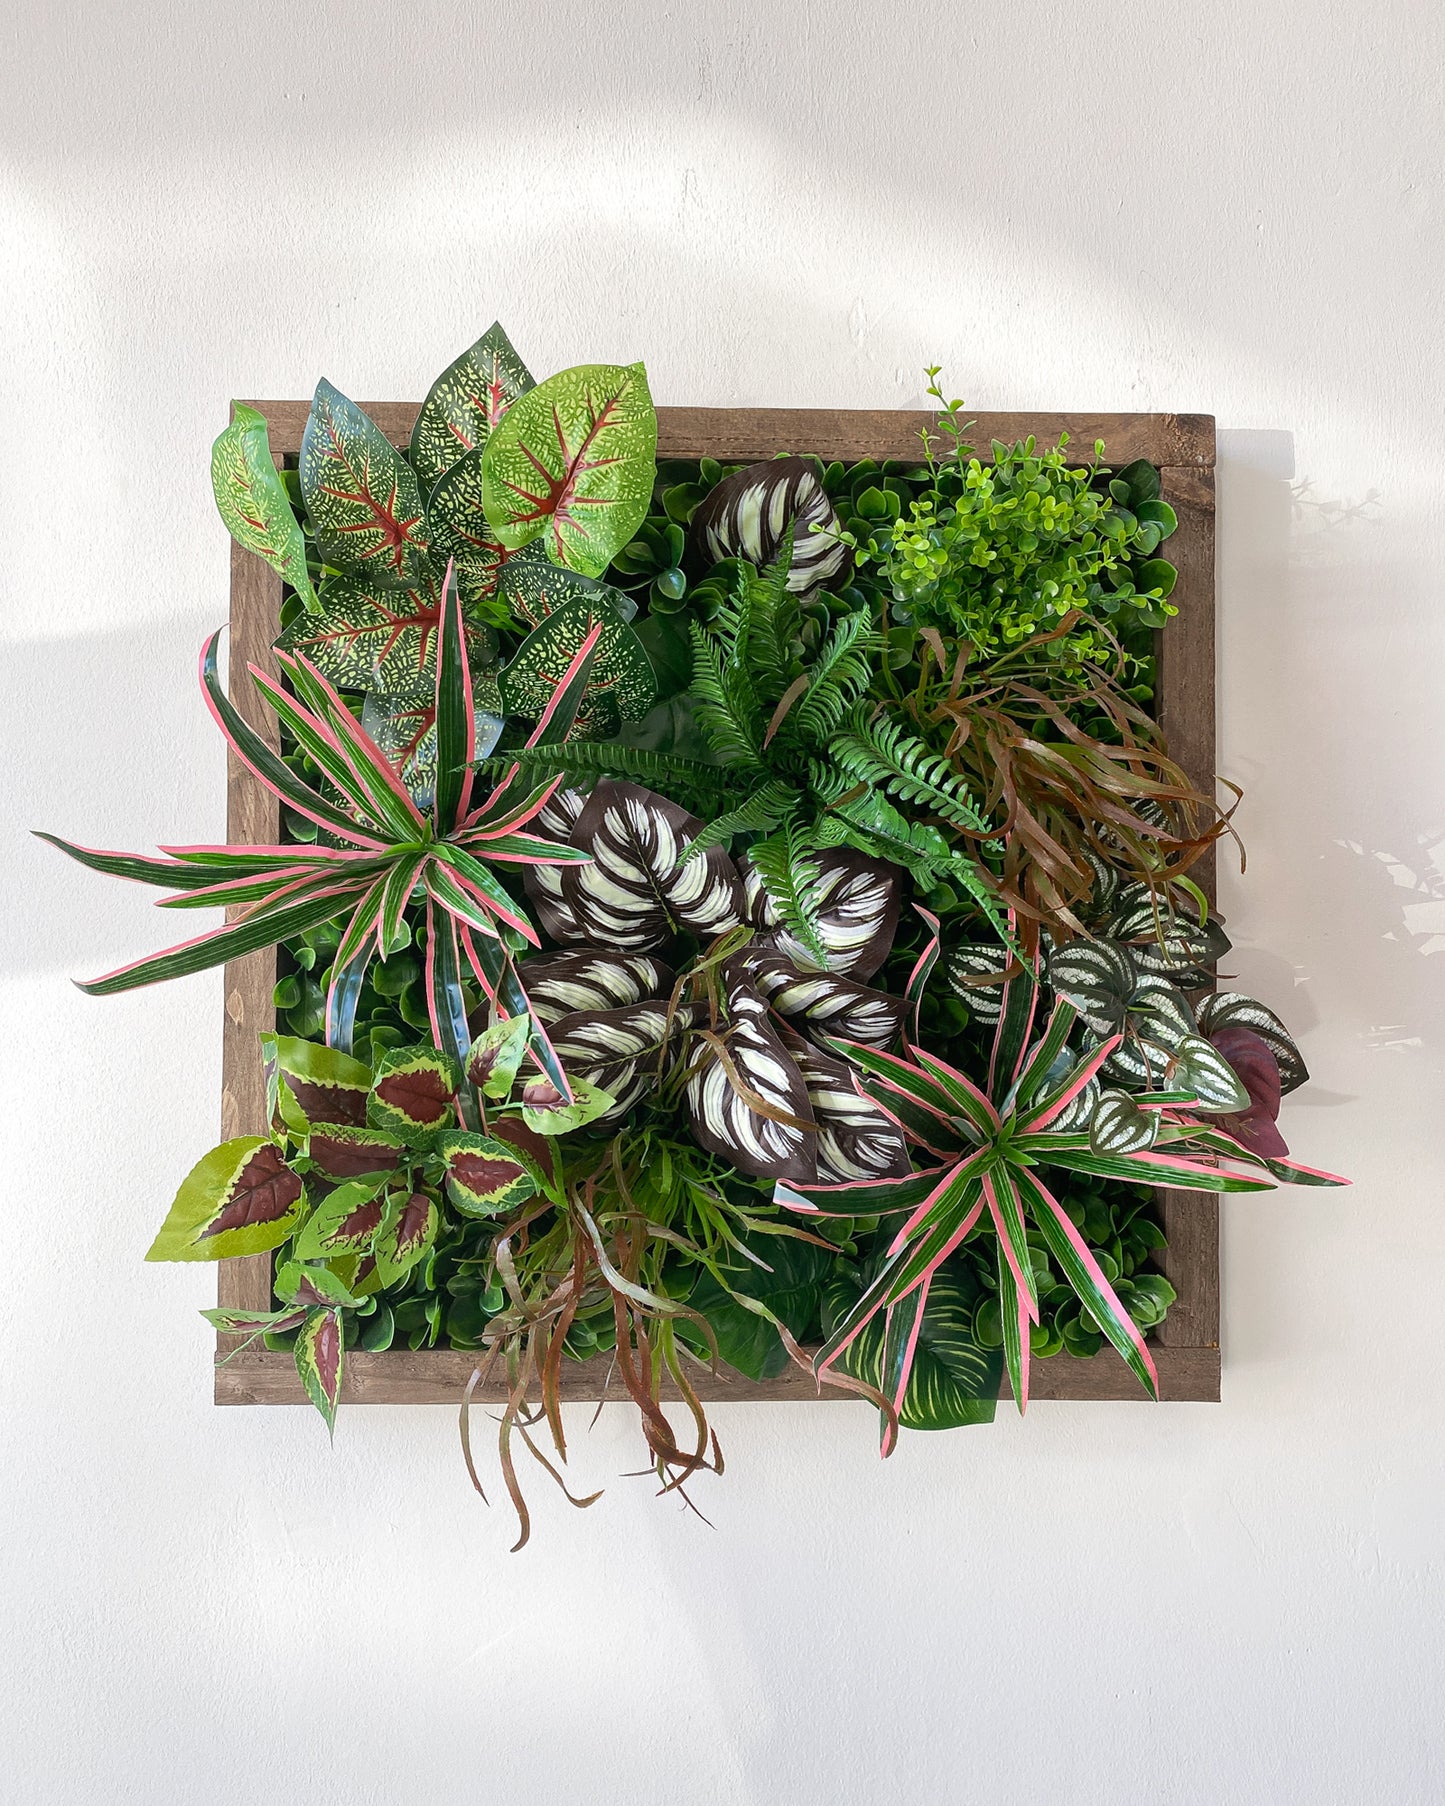 Plantframe/plant wall/moss wall "SORNA" made of Realtouch artificial plants with brown spruce wood frame